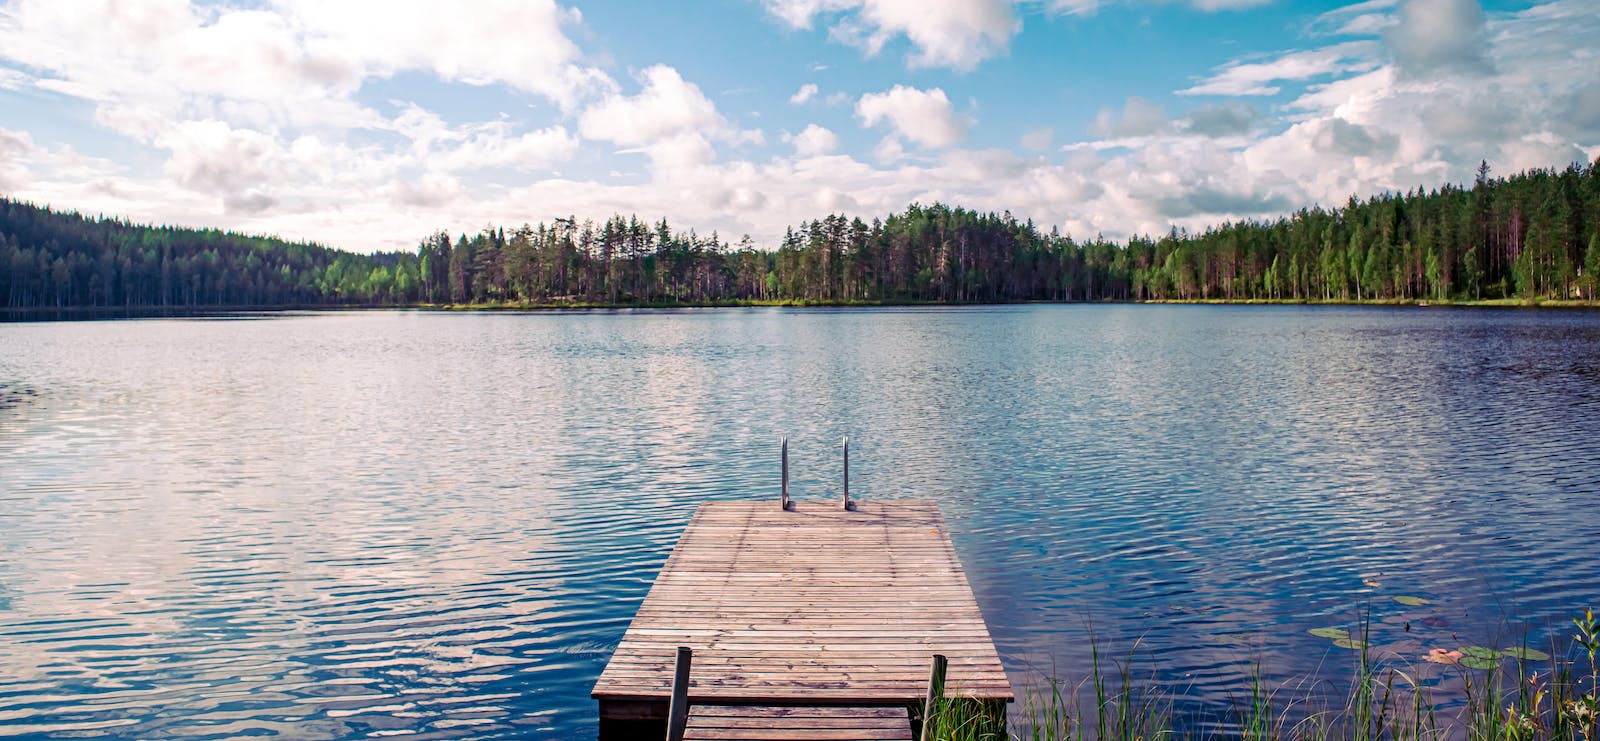 A brown wooden dock on a lake surrounded by trees, mostly pines, but also some birches. The sun is shining outside of the frame, the sky is blue with white fluffy clouds and the water is rippling lazily in a soft wind.